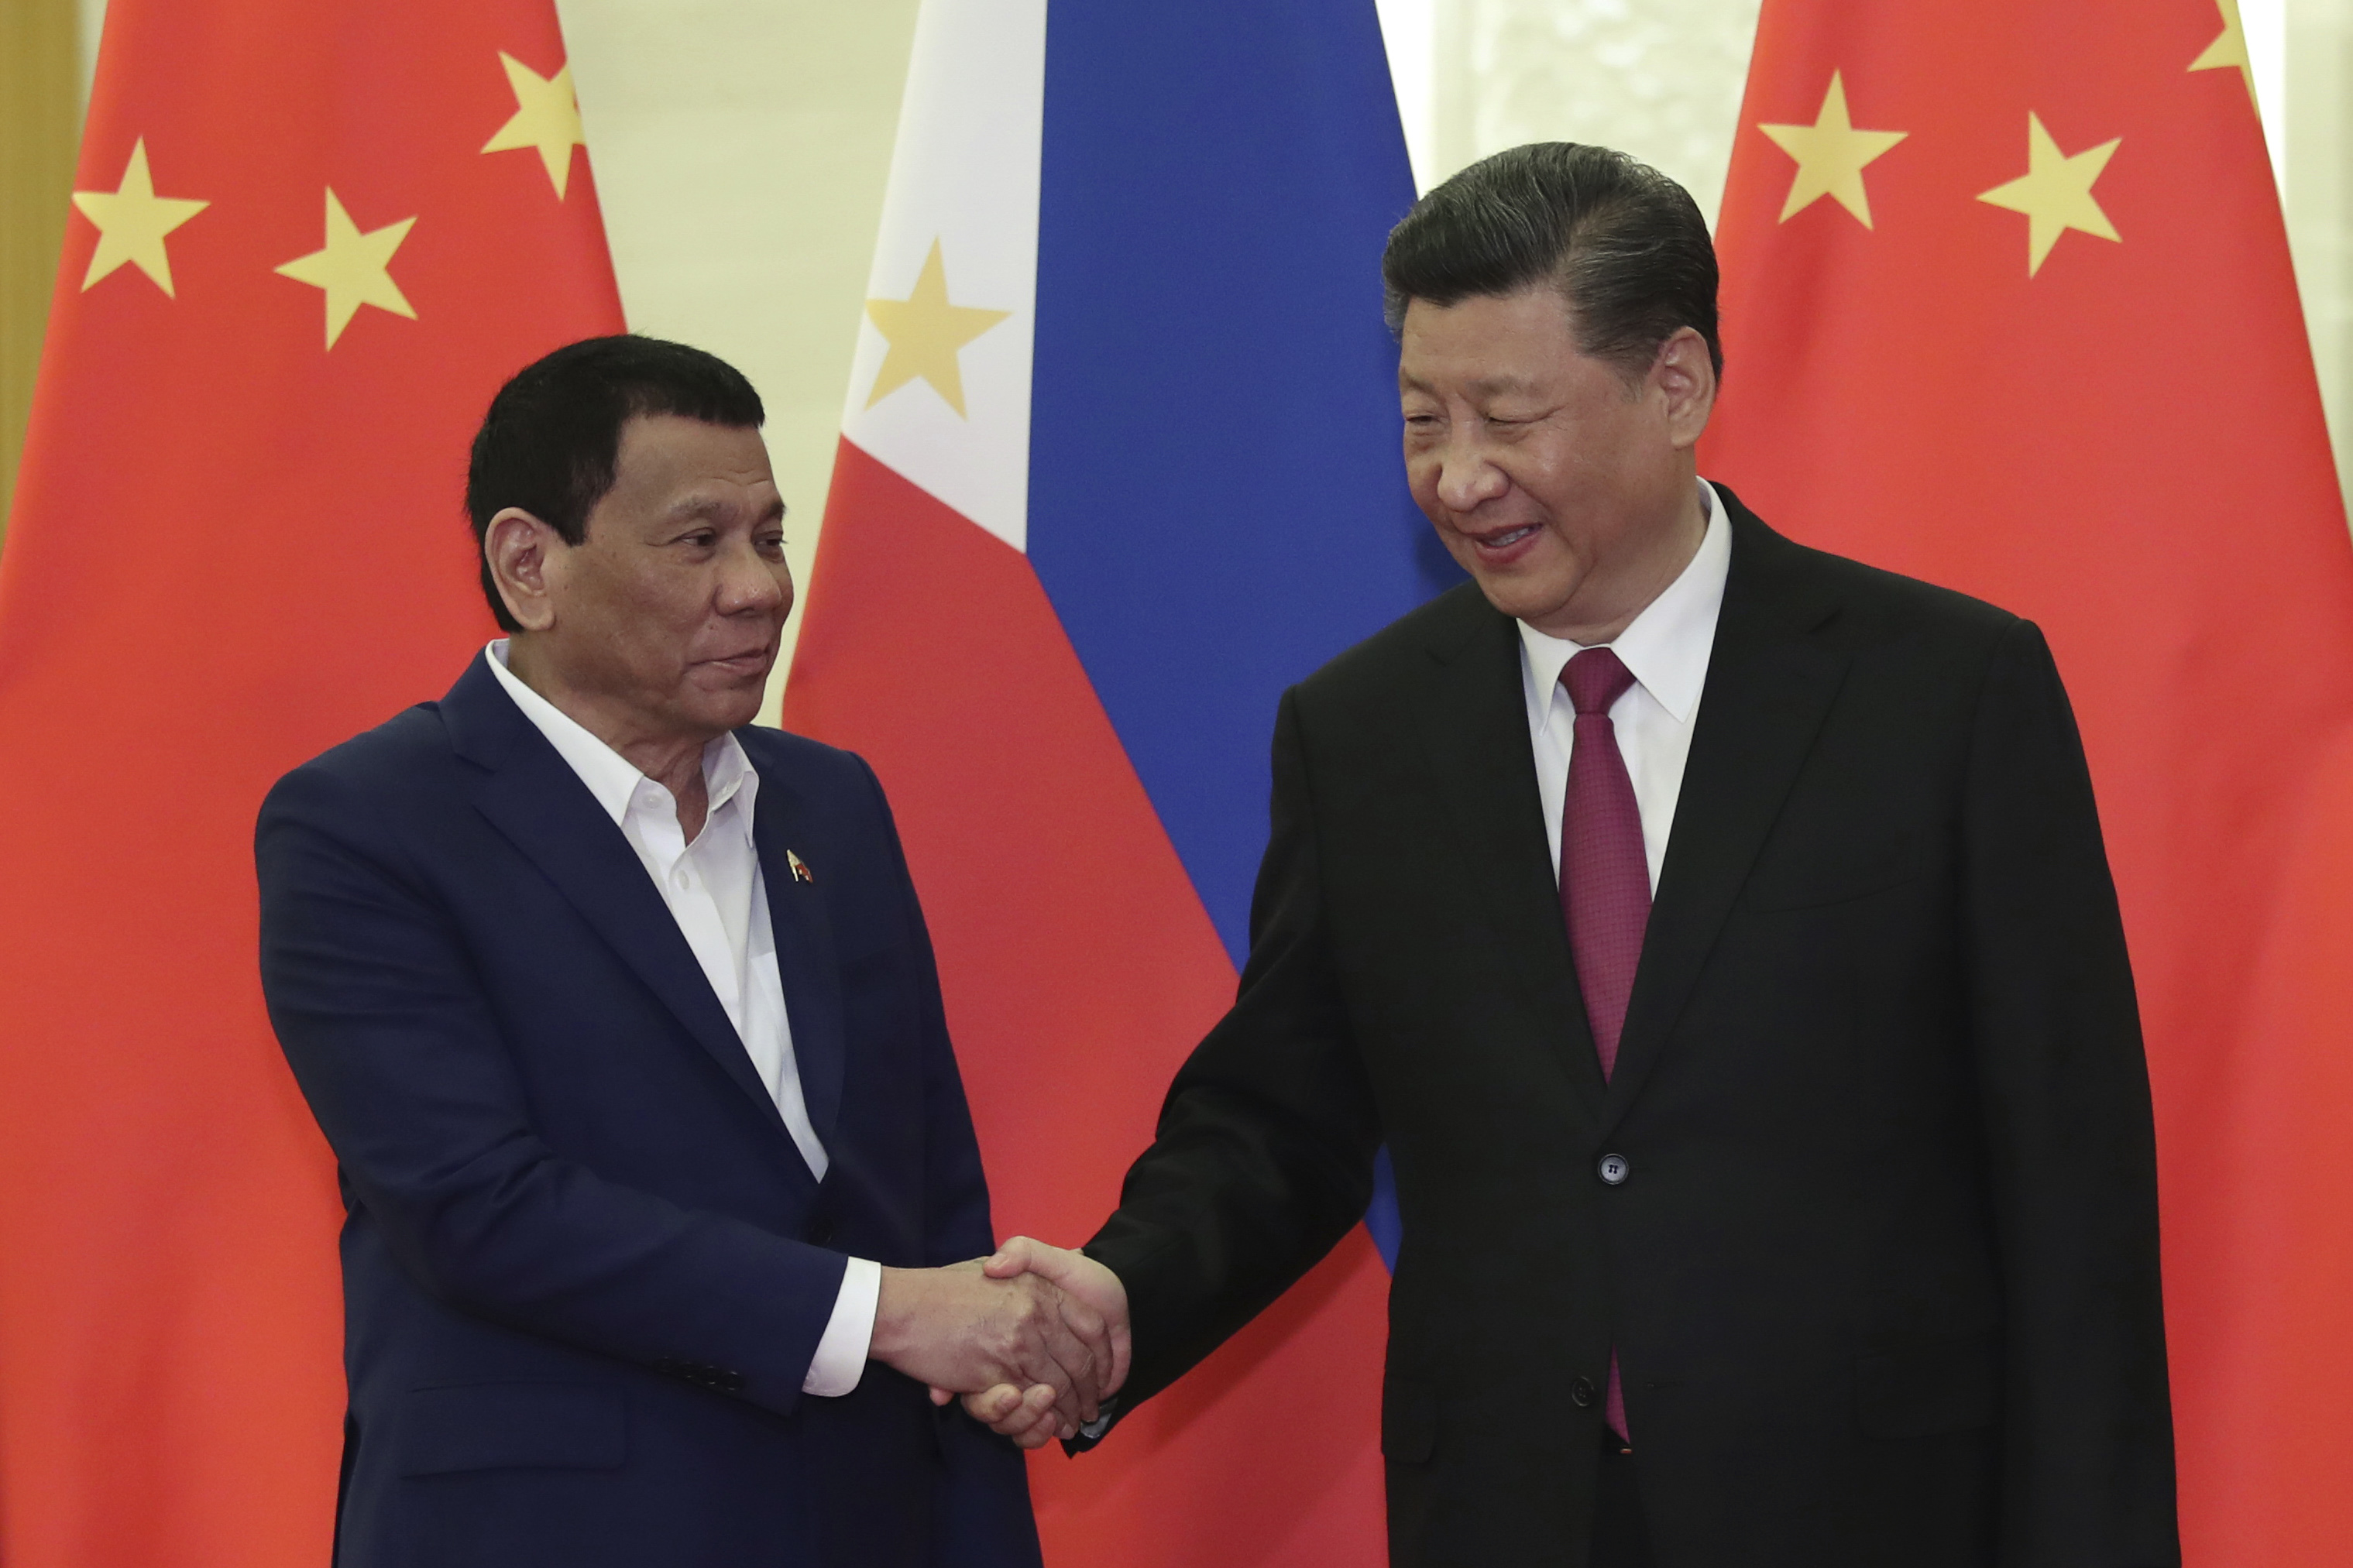 Philippine President Rodrigo Duterte, left, shakes hands with Chinese President Xi Jinping, right, before the meeting at the Great Hall of People in Beijing, China on April 25, 2019. (Photo by Kenzaburo Fukuhara/Kyodo News - Pool/Getty Images)